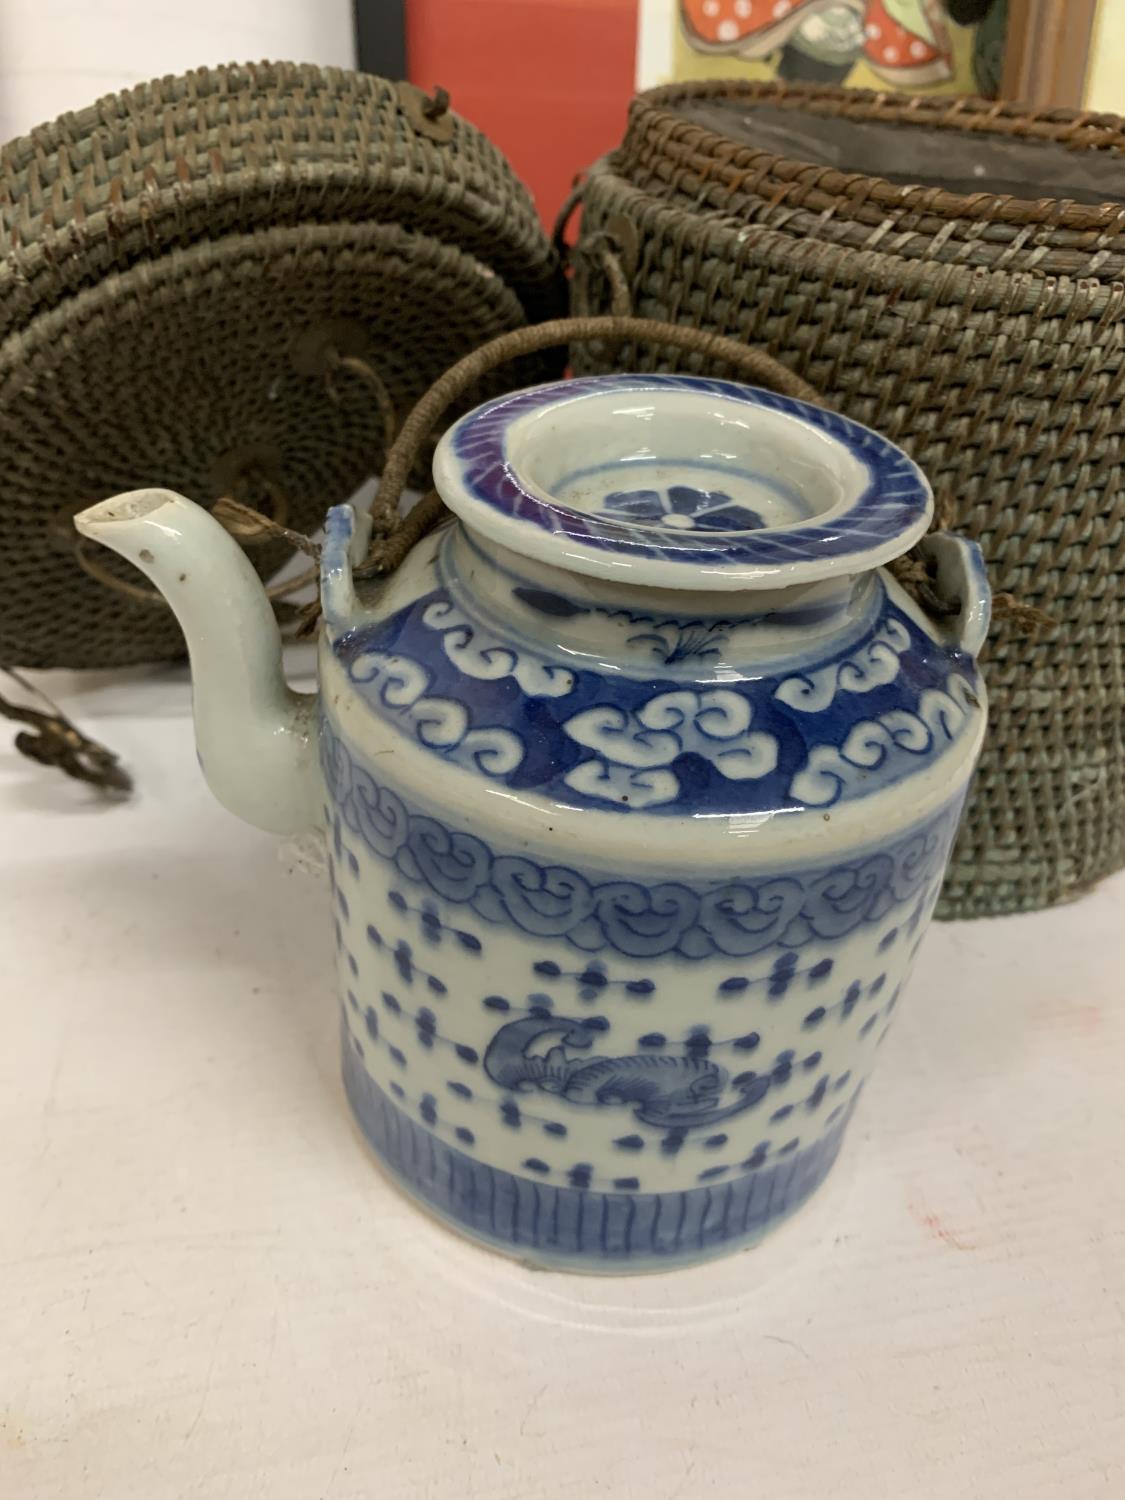 AN ANTIQUE BLUE AND WHITE CHINESE TEAPOT IN ORIGINAL BASKET - Image 2 of 4